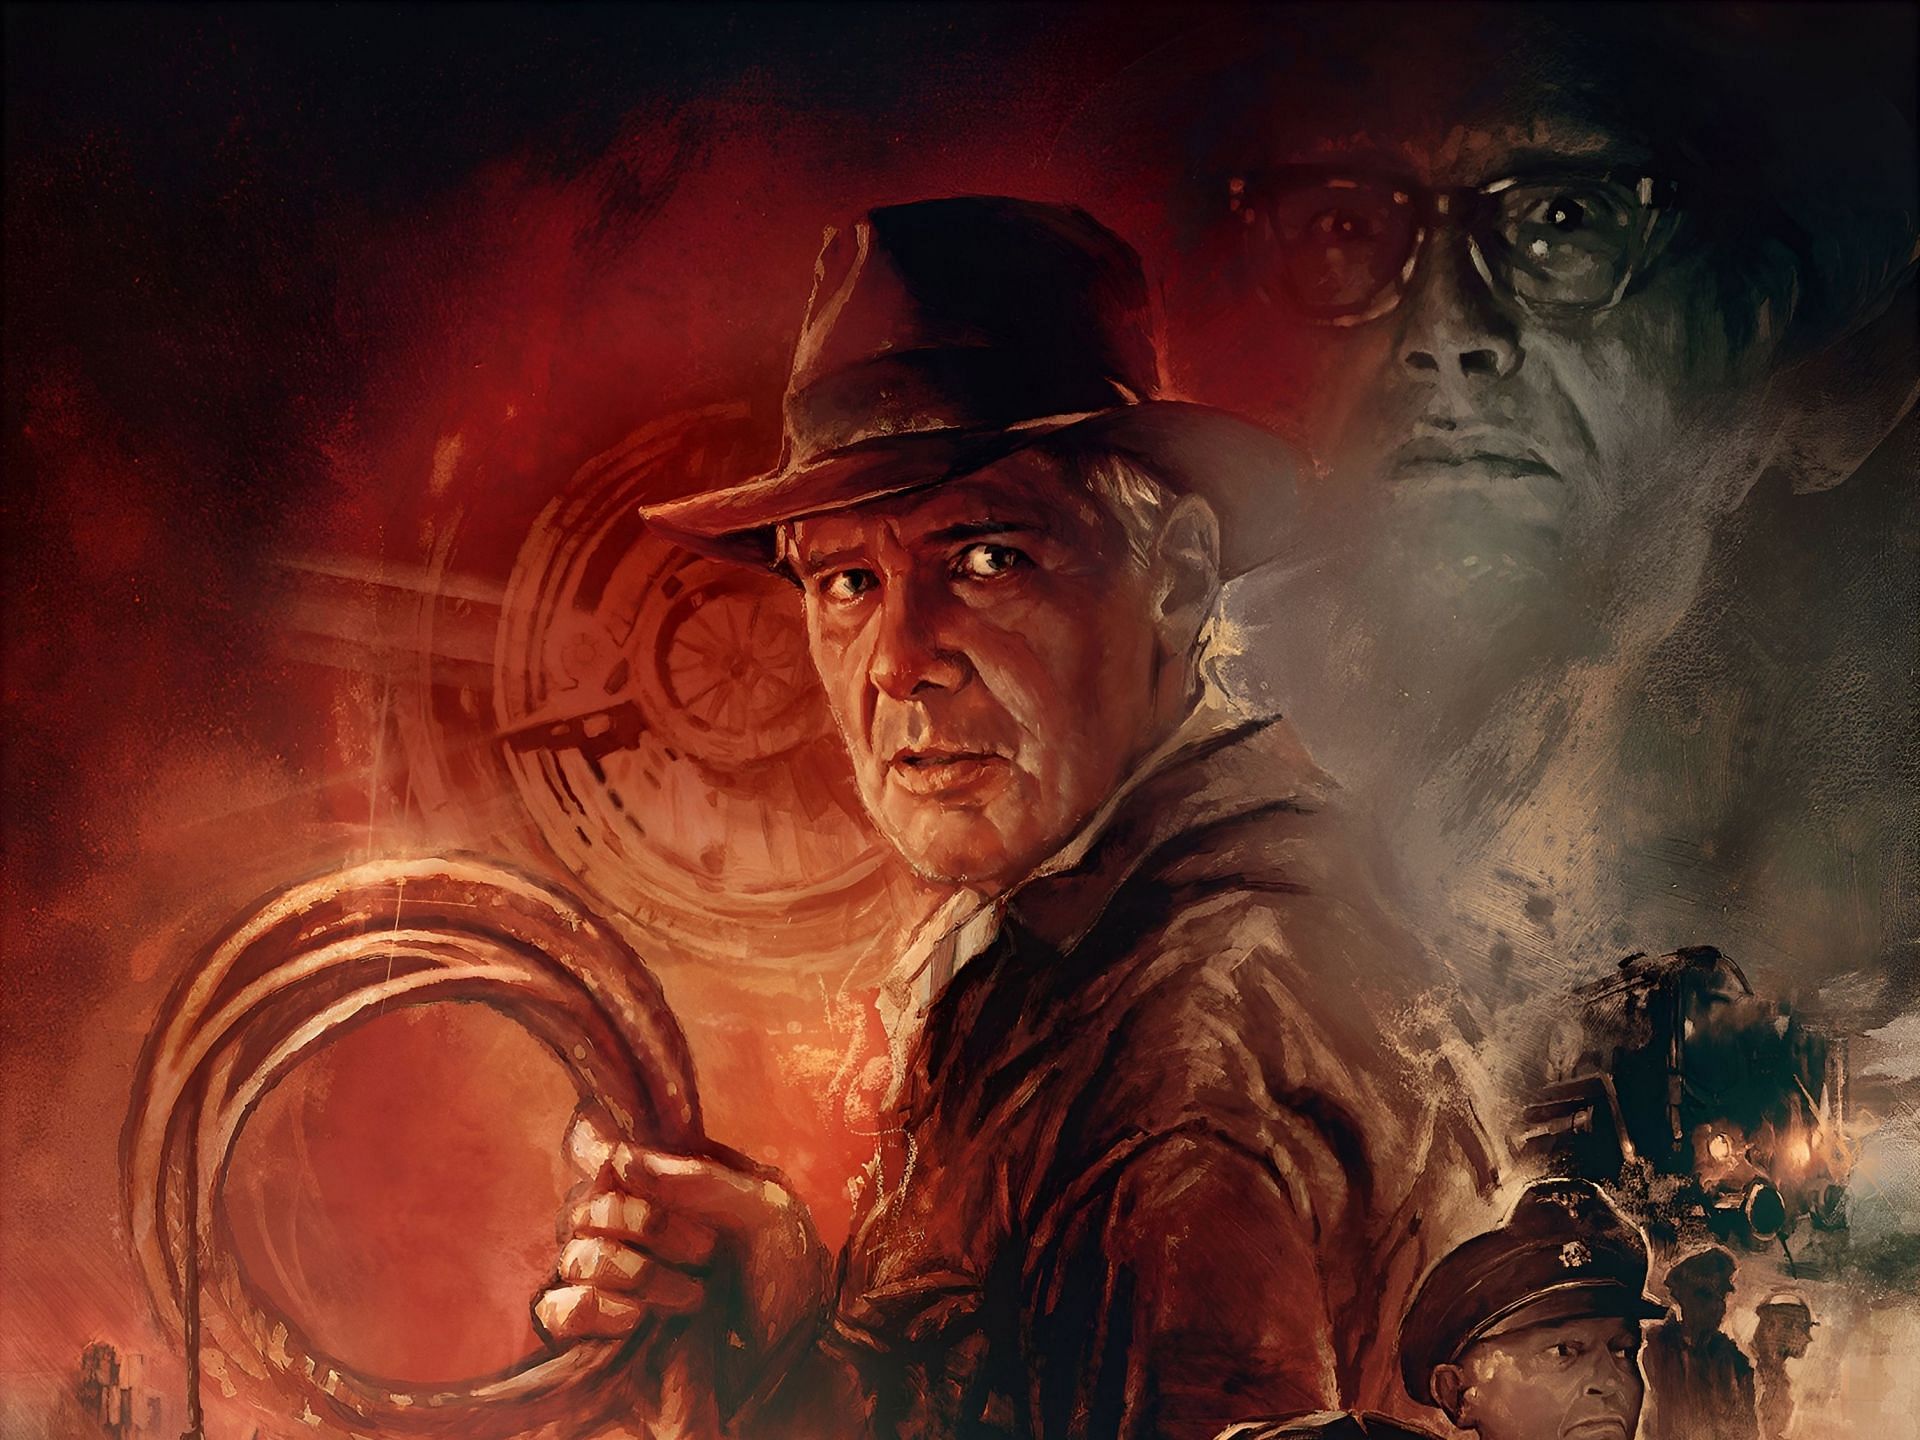 Indiana Jones 5&#039;s storyline failed to resonate strongly as previous installments in the Indiana Jones franchise. (Image via Disney)